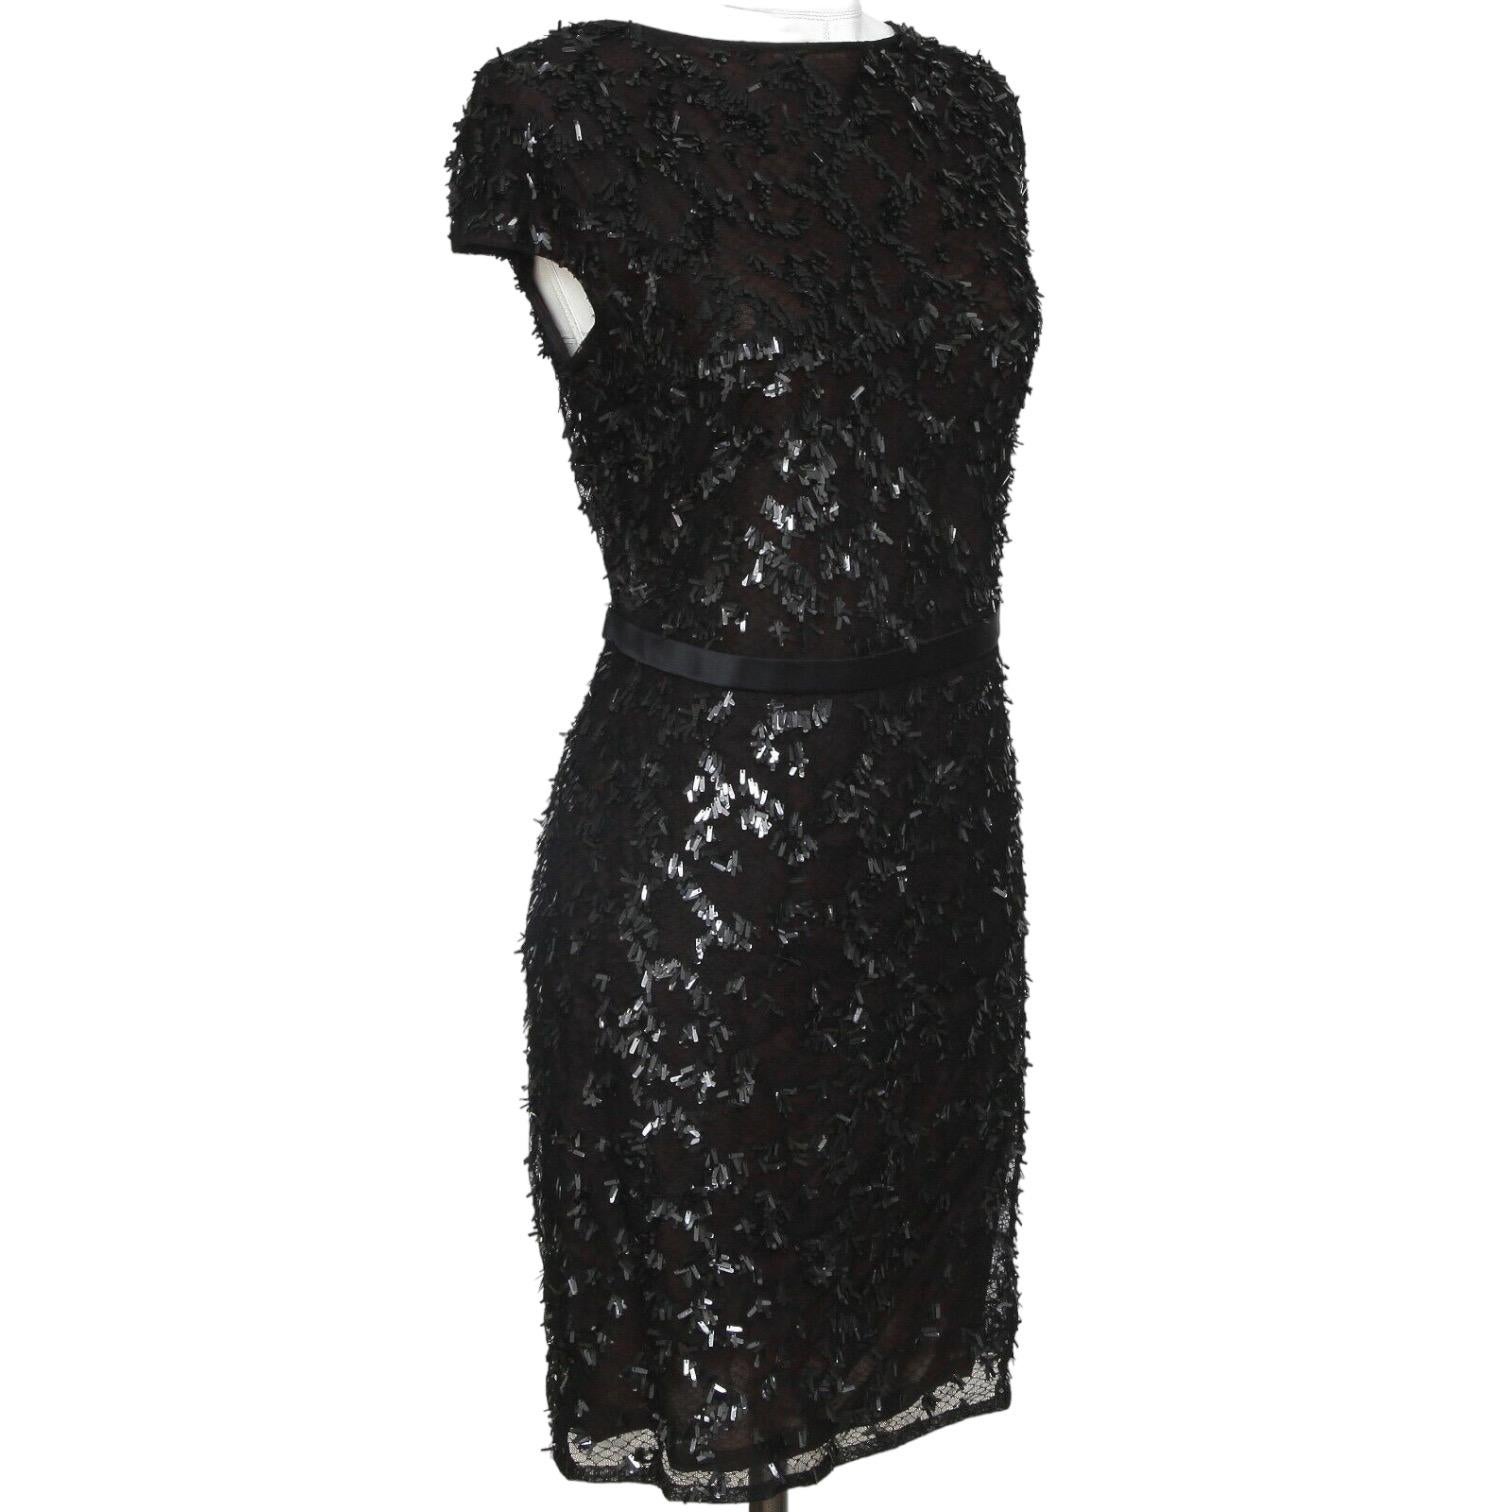 GUARANTEED AUTHENTIC GUCCI RUNWAY BLACK PAILLETTE NETTING DETAILED COCKTAIL DRESS

Design:
 • Stunning black cocktail dress with a netting and pallette design throughout.
 • Cap sleeve.
 • Rear low cutout and zipper closure.
 • Maroon silk lining